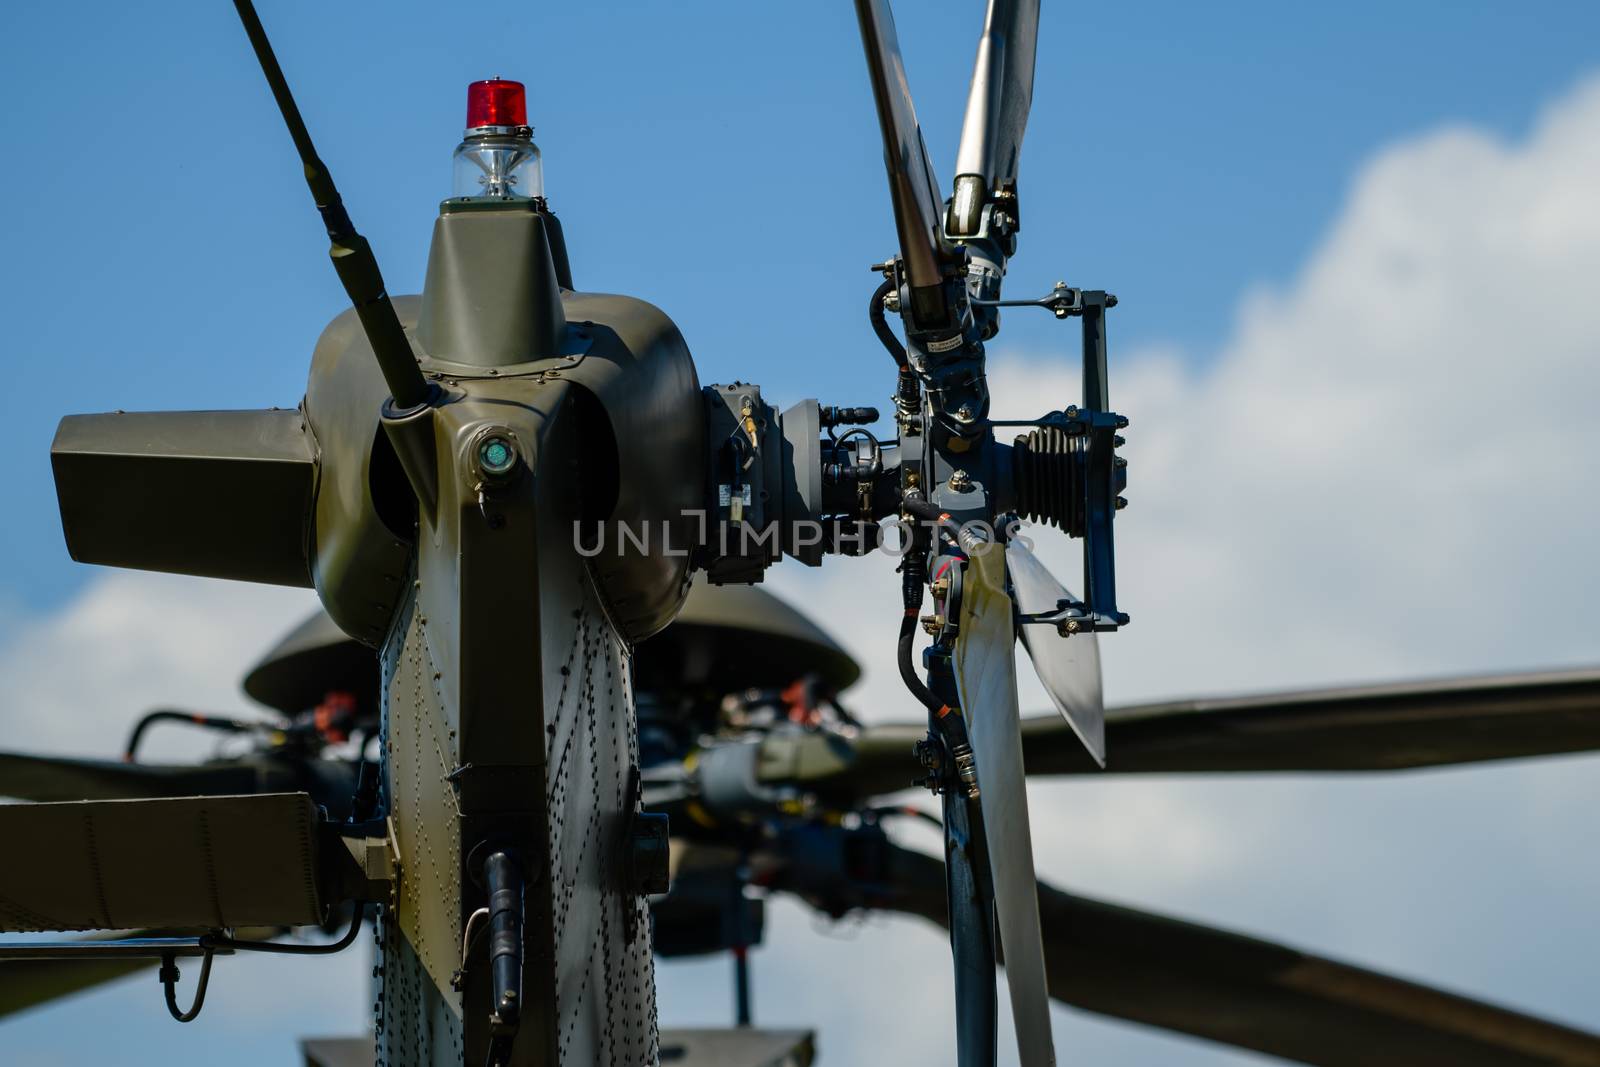 Detail of tail rotor of military helicopter, main rotor in background by asafaric